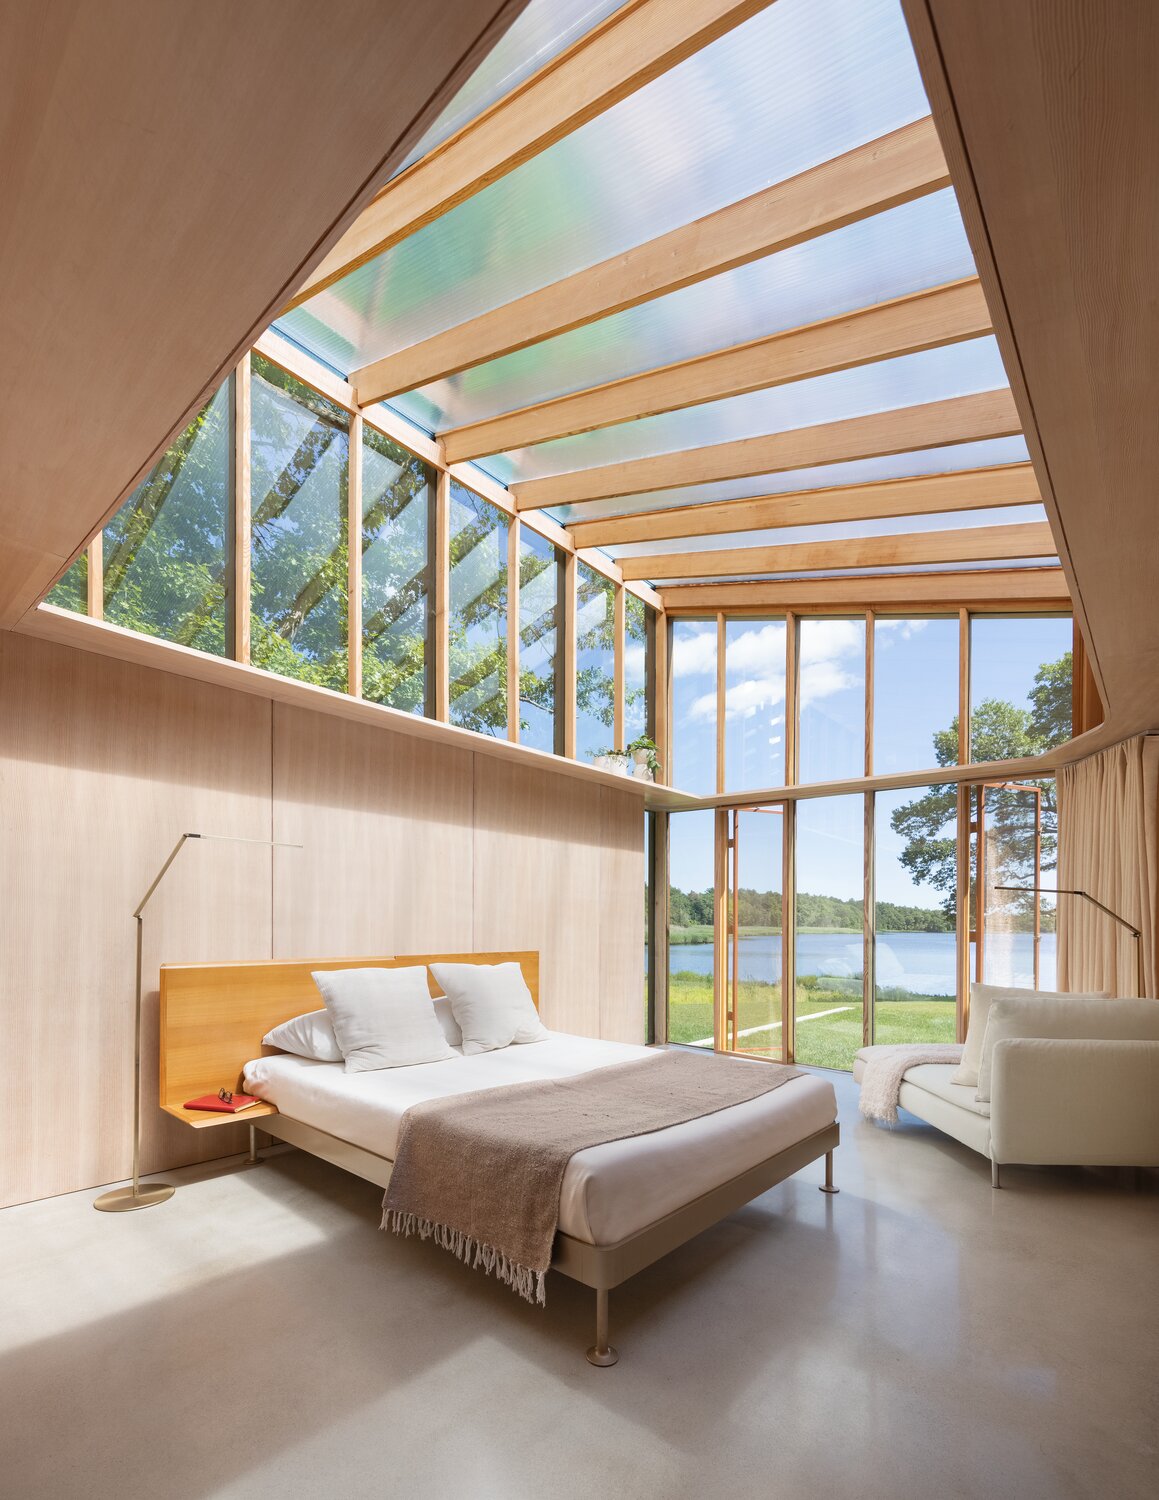 The master bedroom is at one with the sky and the natural environment. The owner admits that the space can be challenging for those who are not early risers. Therefore, they have plenty of silk eye masks for anyone who desires them.